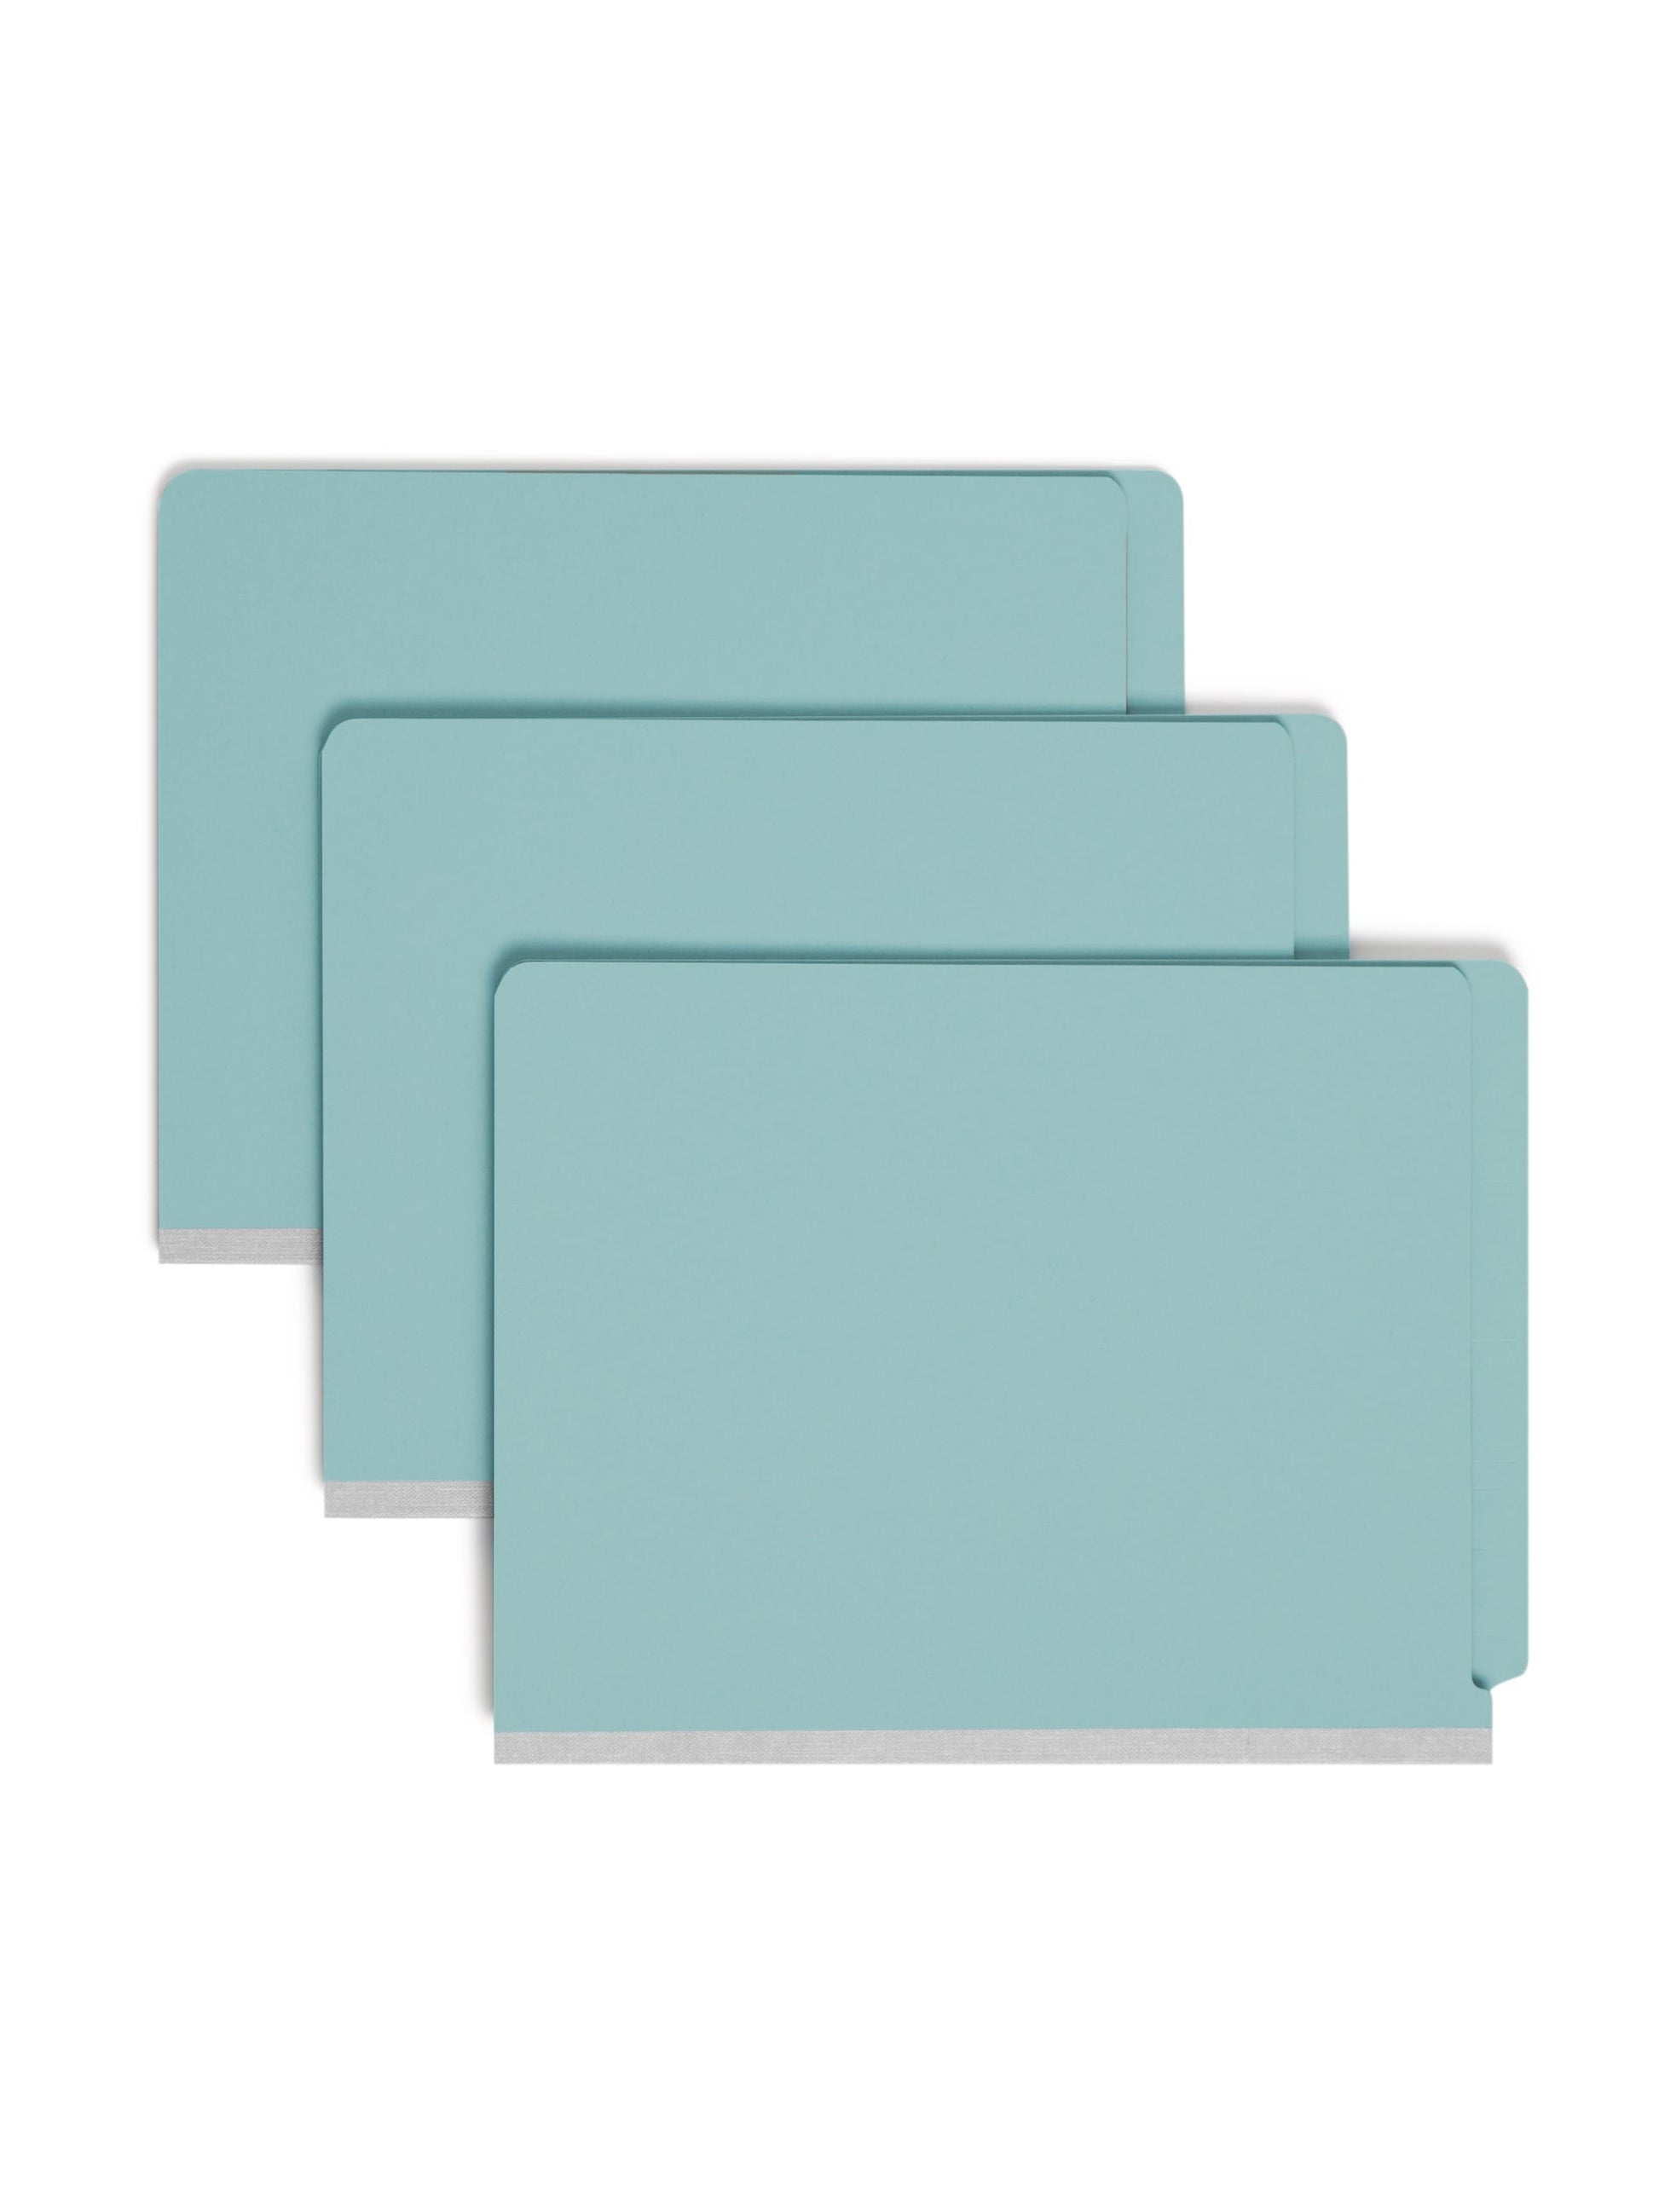 SafeSHIELD® Pressboard End Tab Classification File Folders, Straight-Cut Tab, 2 inch Expansion, 2 Divider, Blue Color, Letter Size, Set of 0, 30086486267817